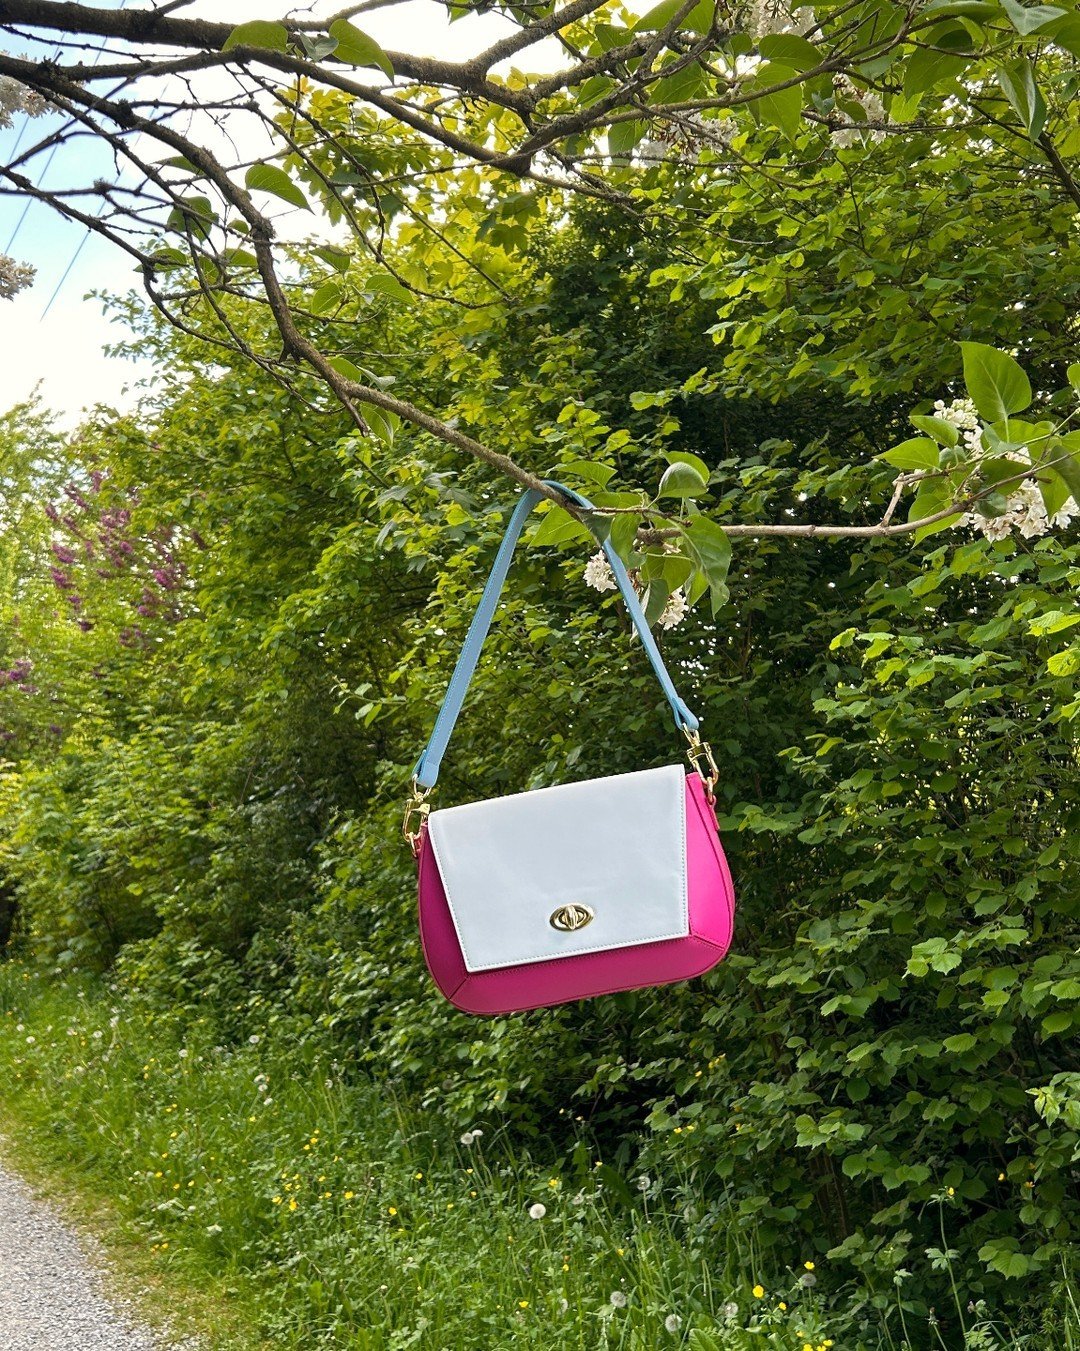 Summer is almost here! ☀️

Time to bring out the bright and bold summer colors.
Don't forget to switch our your Aja handbag with our additional colors 🤩

What color flap and straps would you use with this Fuschia Aja? 👛

#aja #kaeinthe #handbag #su